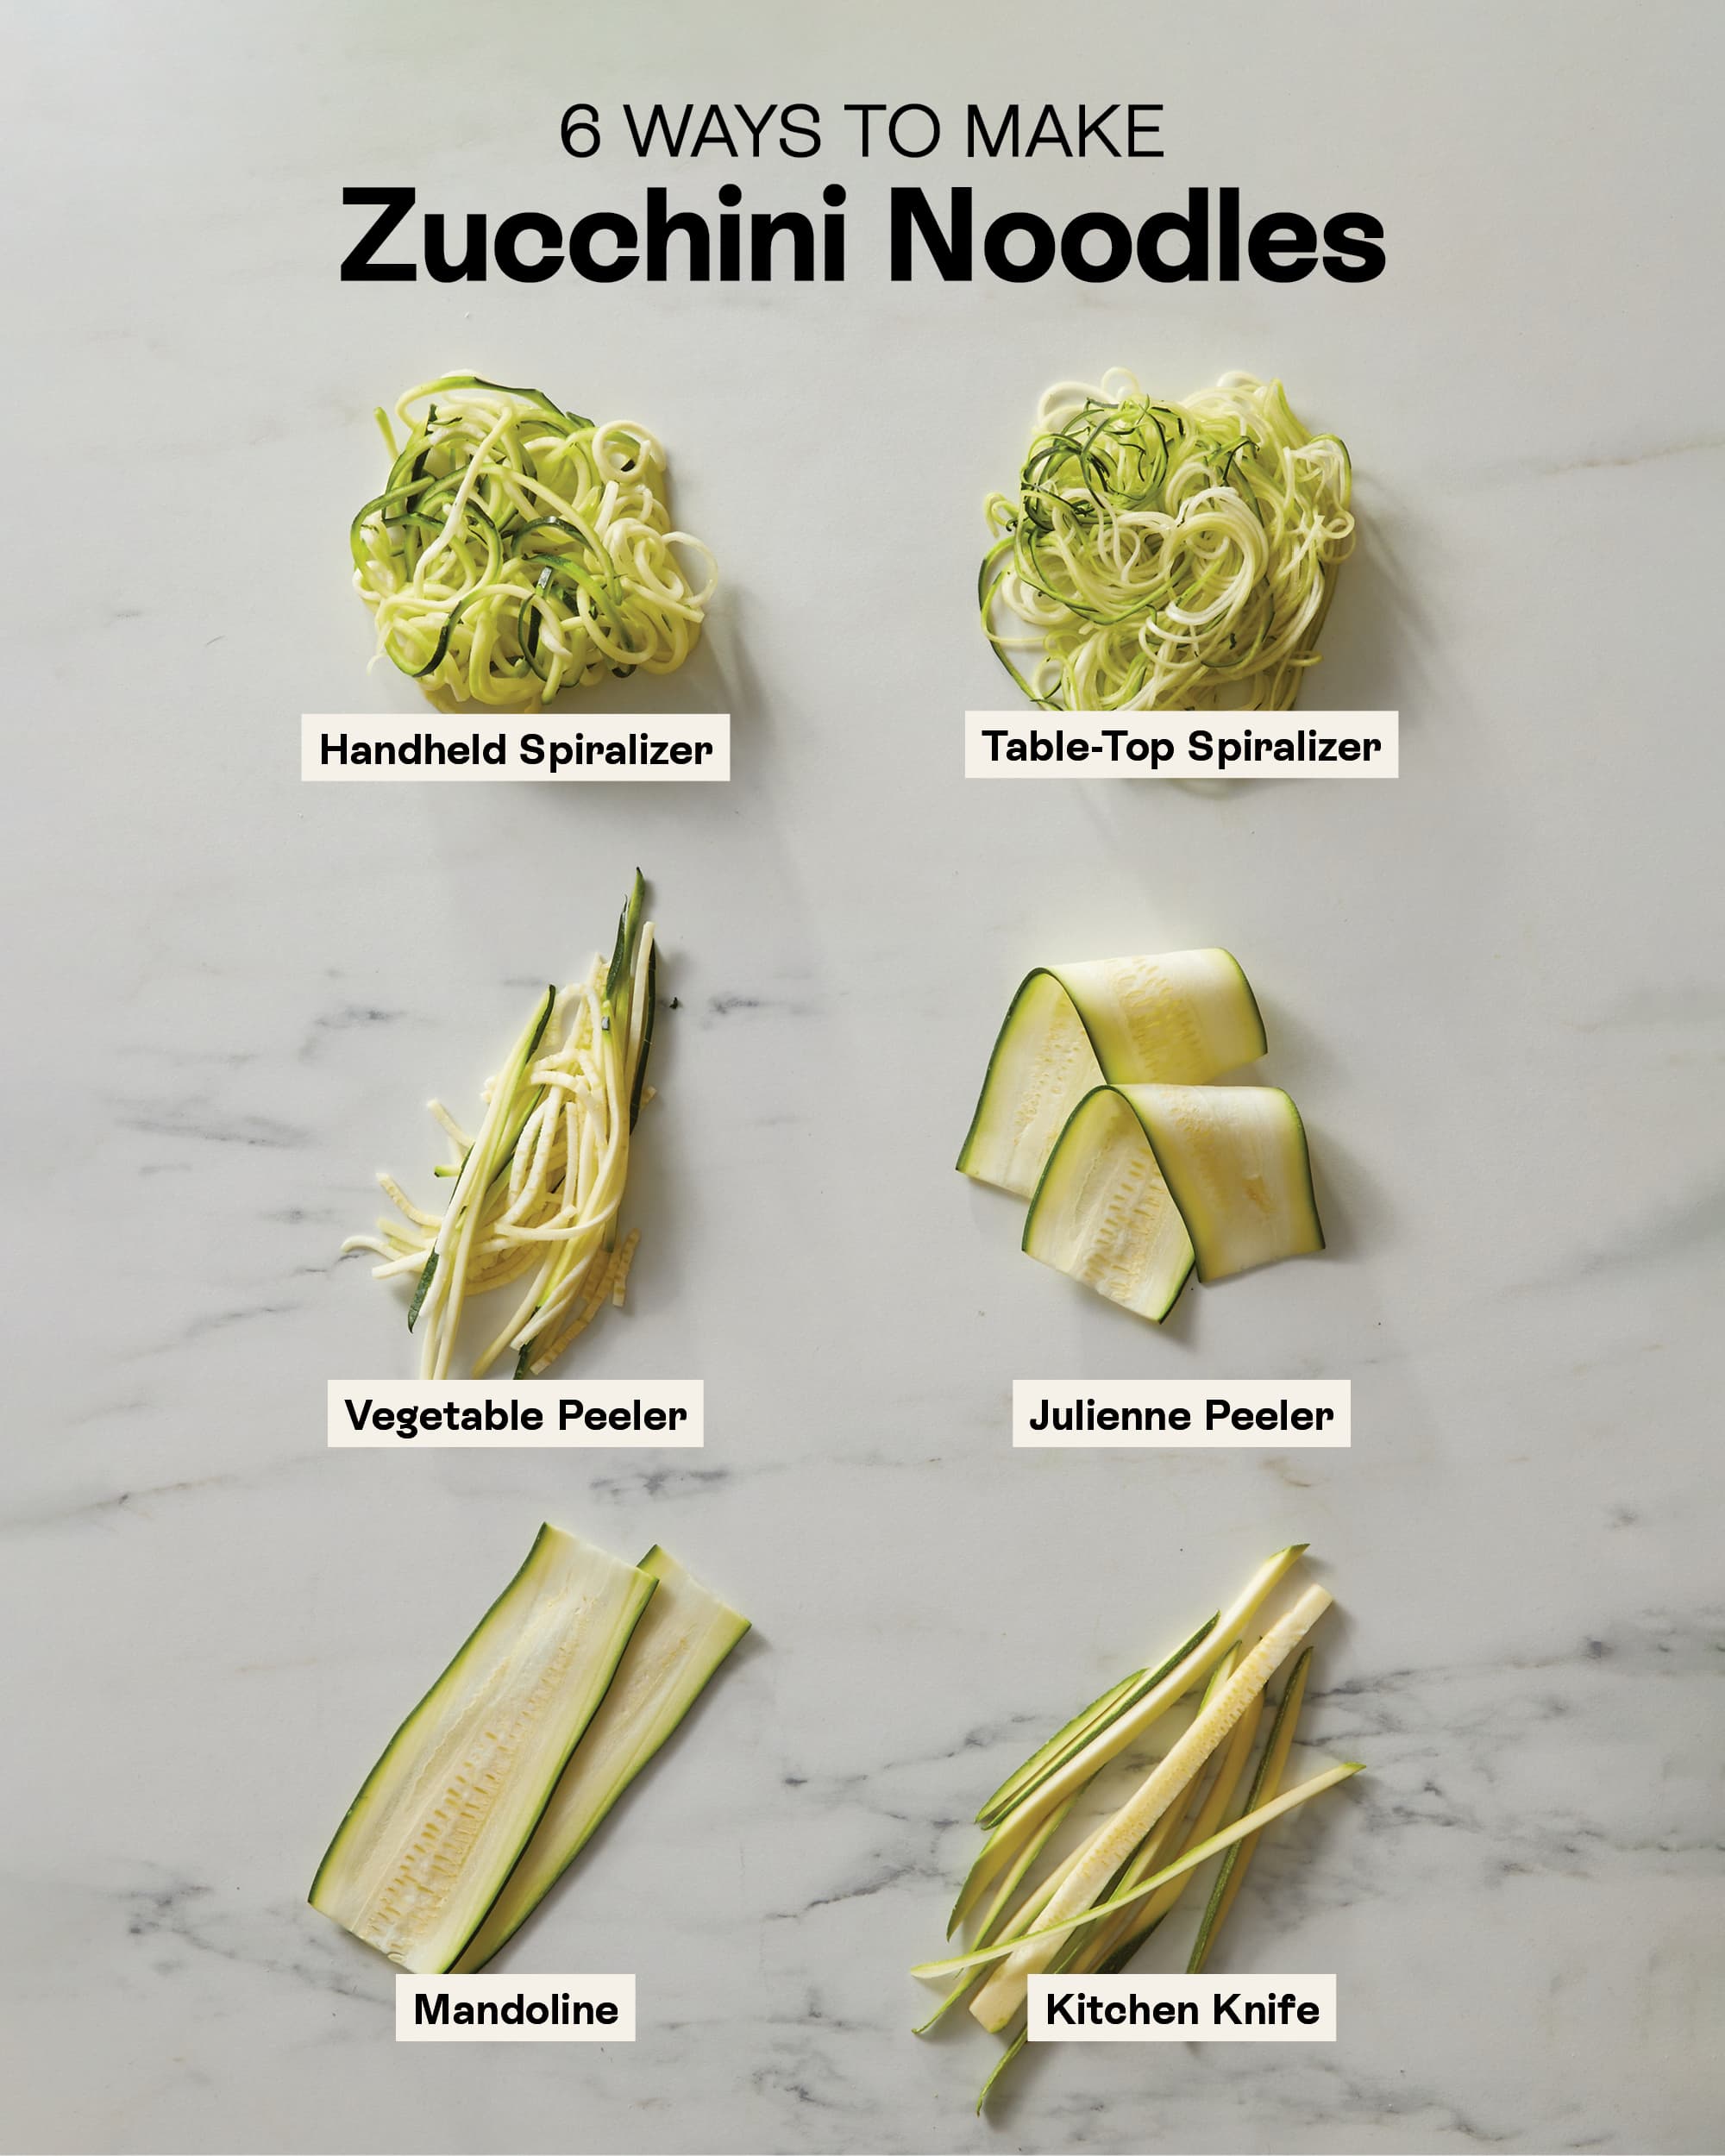 https://cdn.apartmenttherapy.info/image/upload/v1658959700/k/Photo/Recipes/2022-06-zucchini-noodles%20/HowToMake-ZucchiniNoodles-lead.jpg